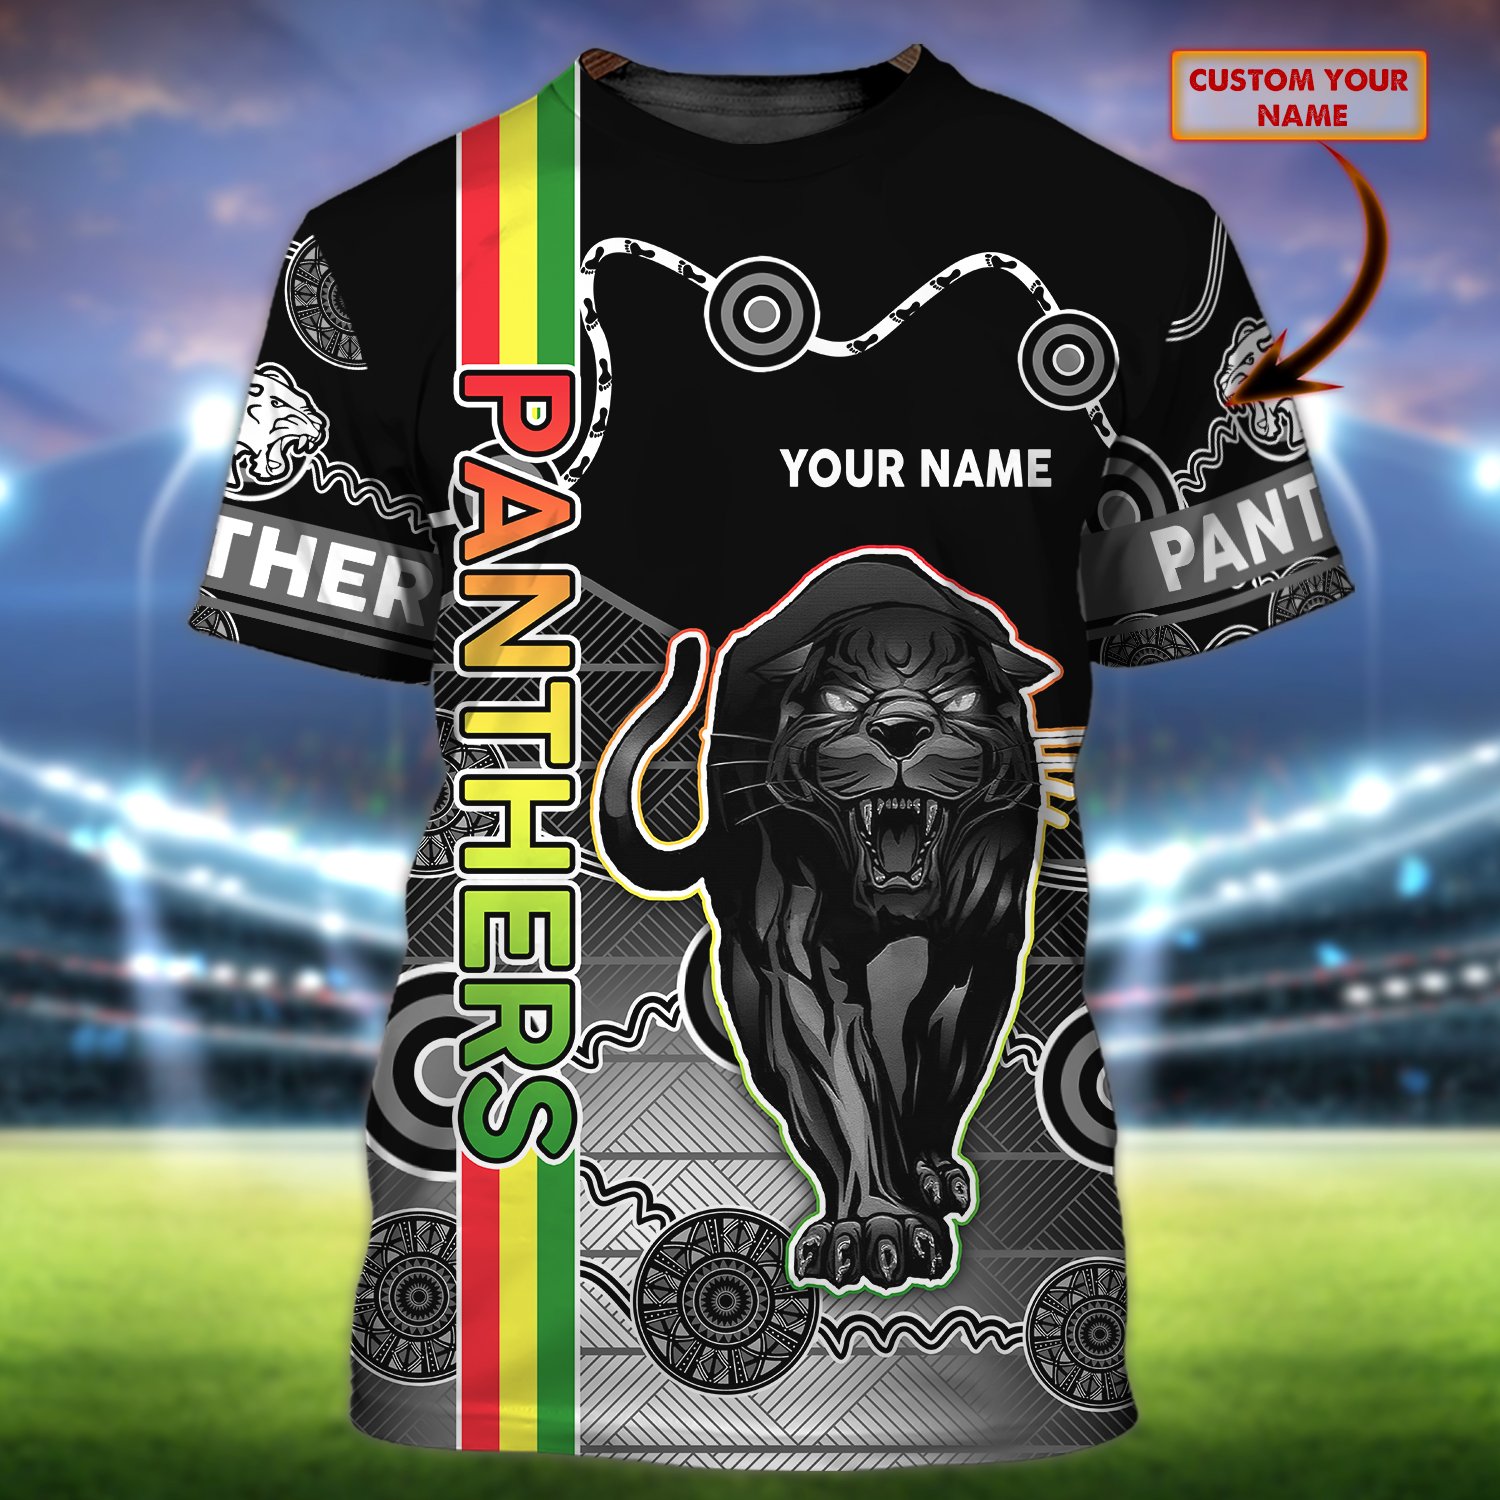 Panthers Penrith Leagues Club custom personalized name 3d shirt